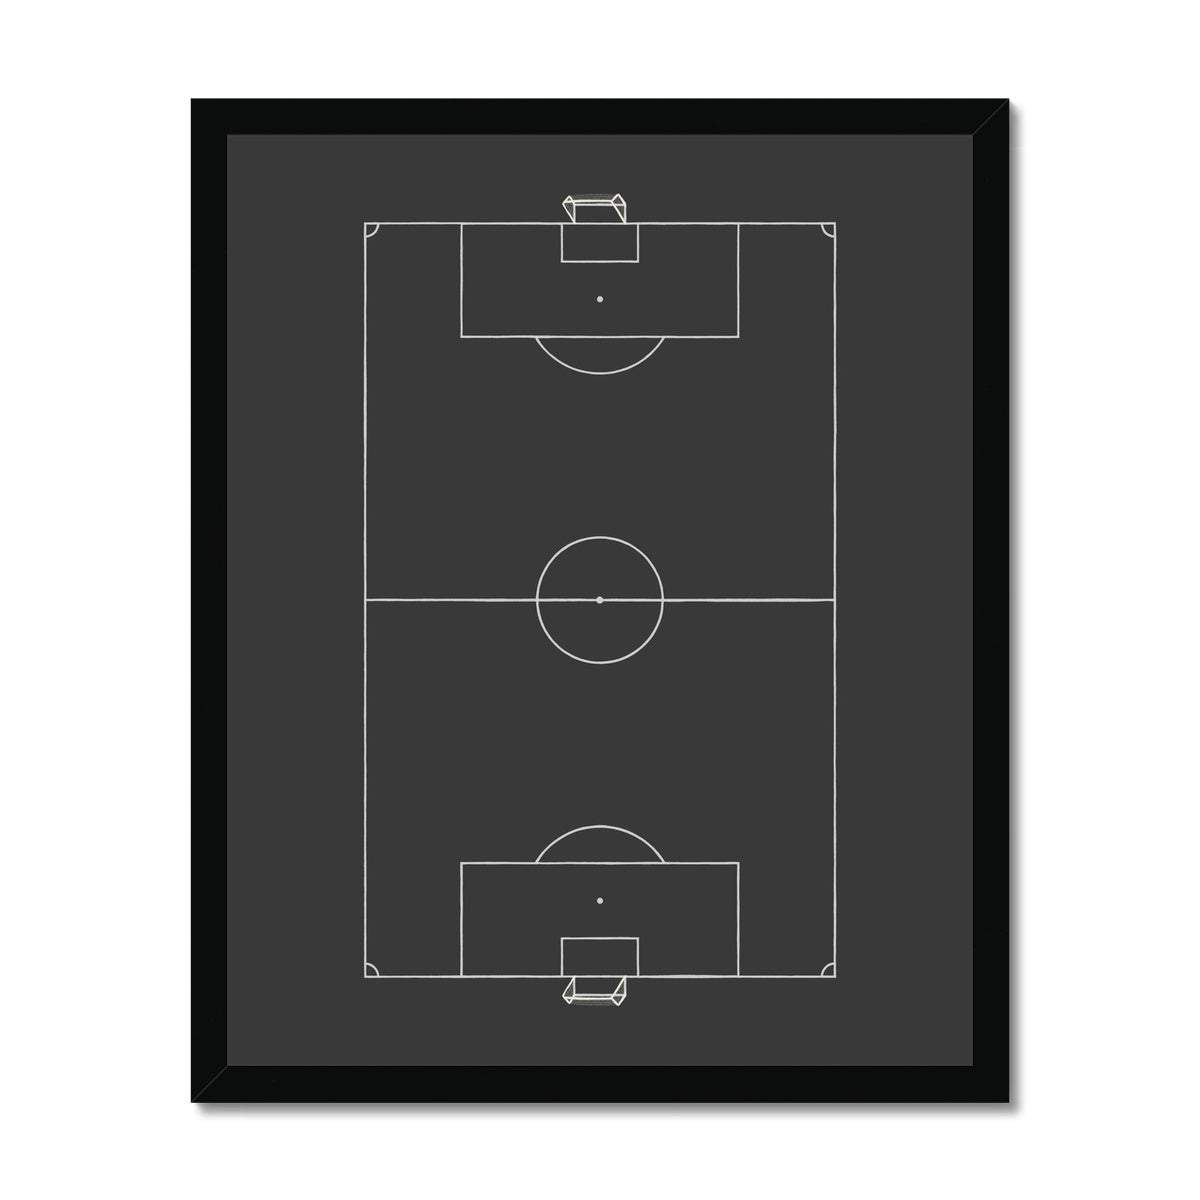 Football pitch in black / Framed Print